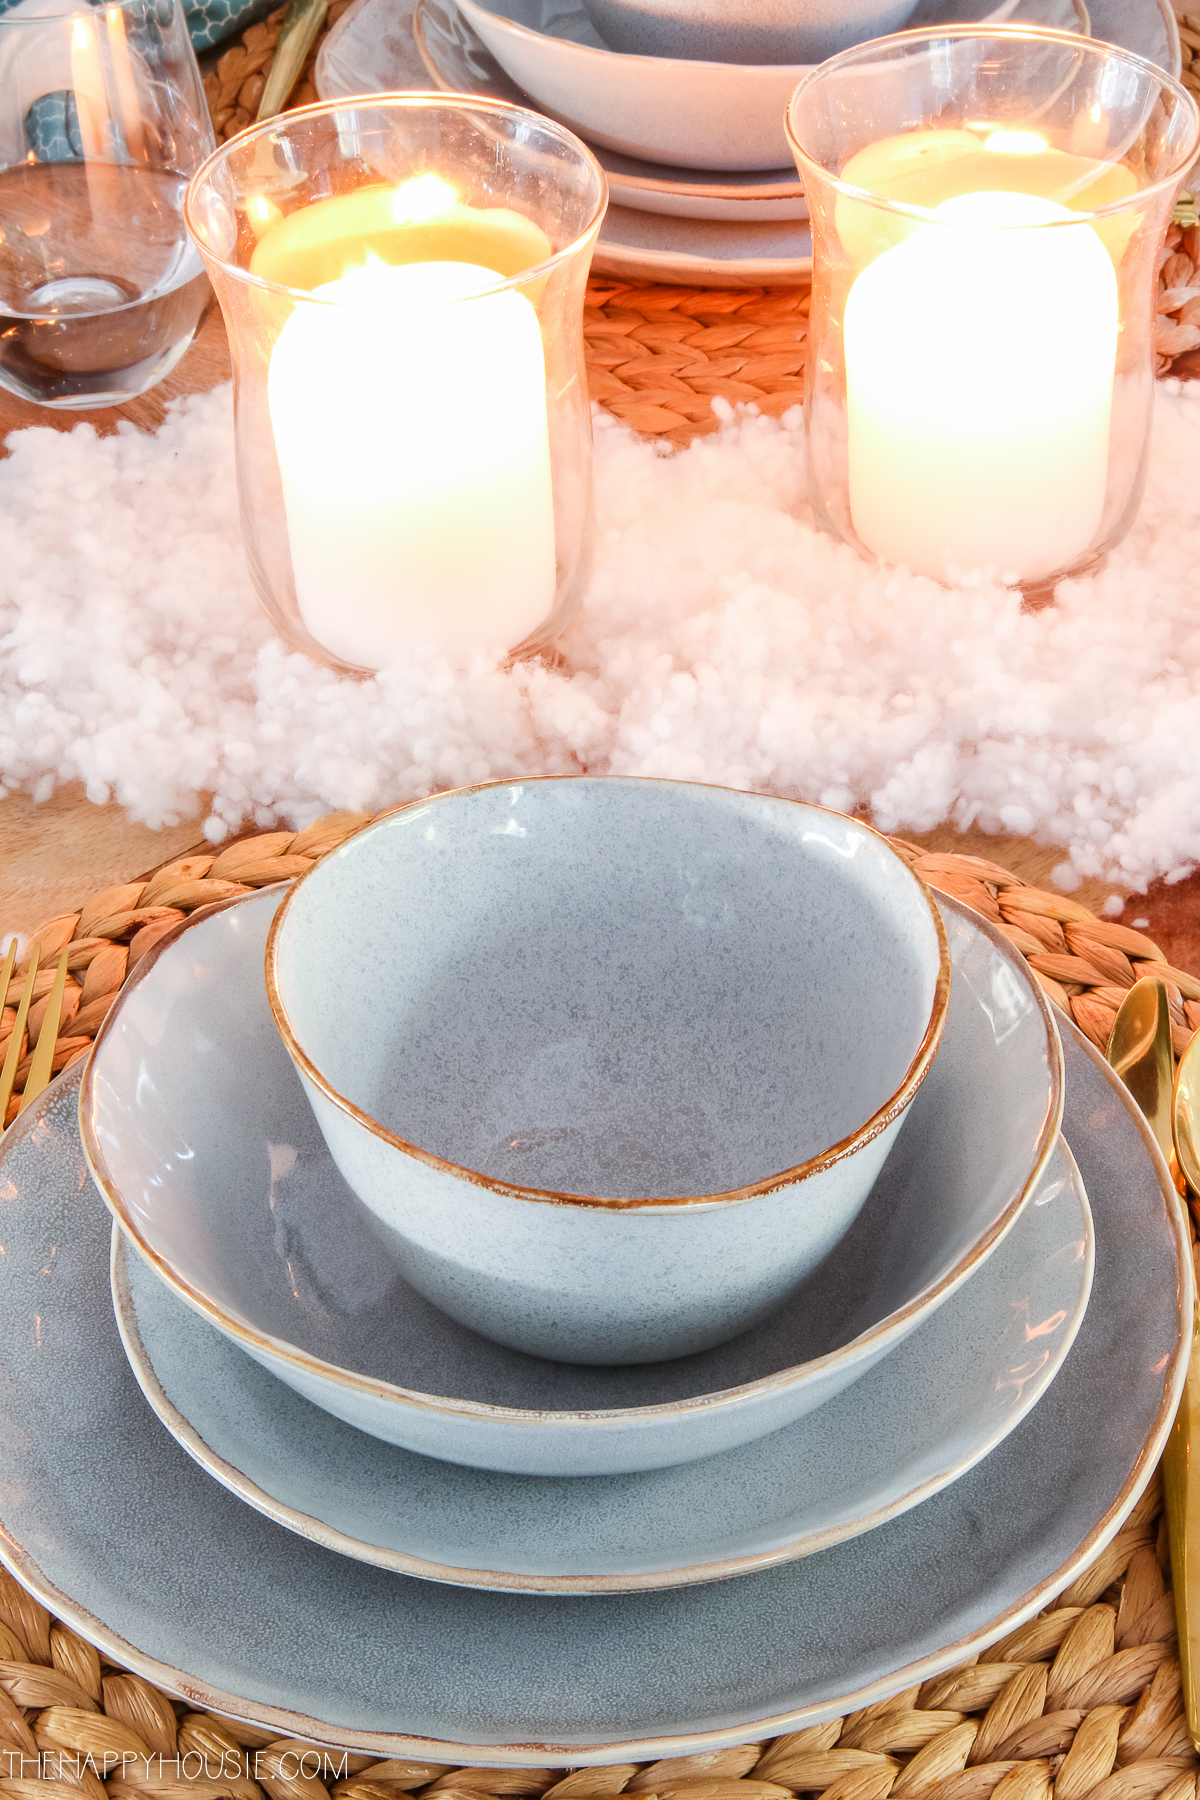 Ceramic dishes in a soft grey with a light brown edge.